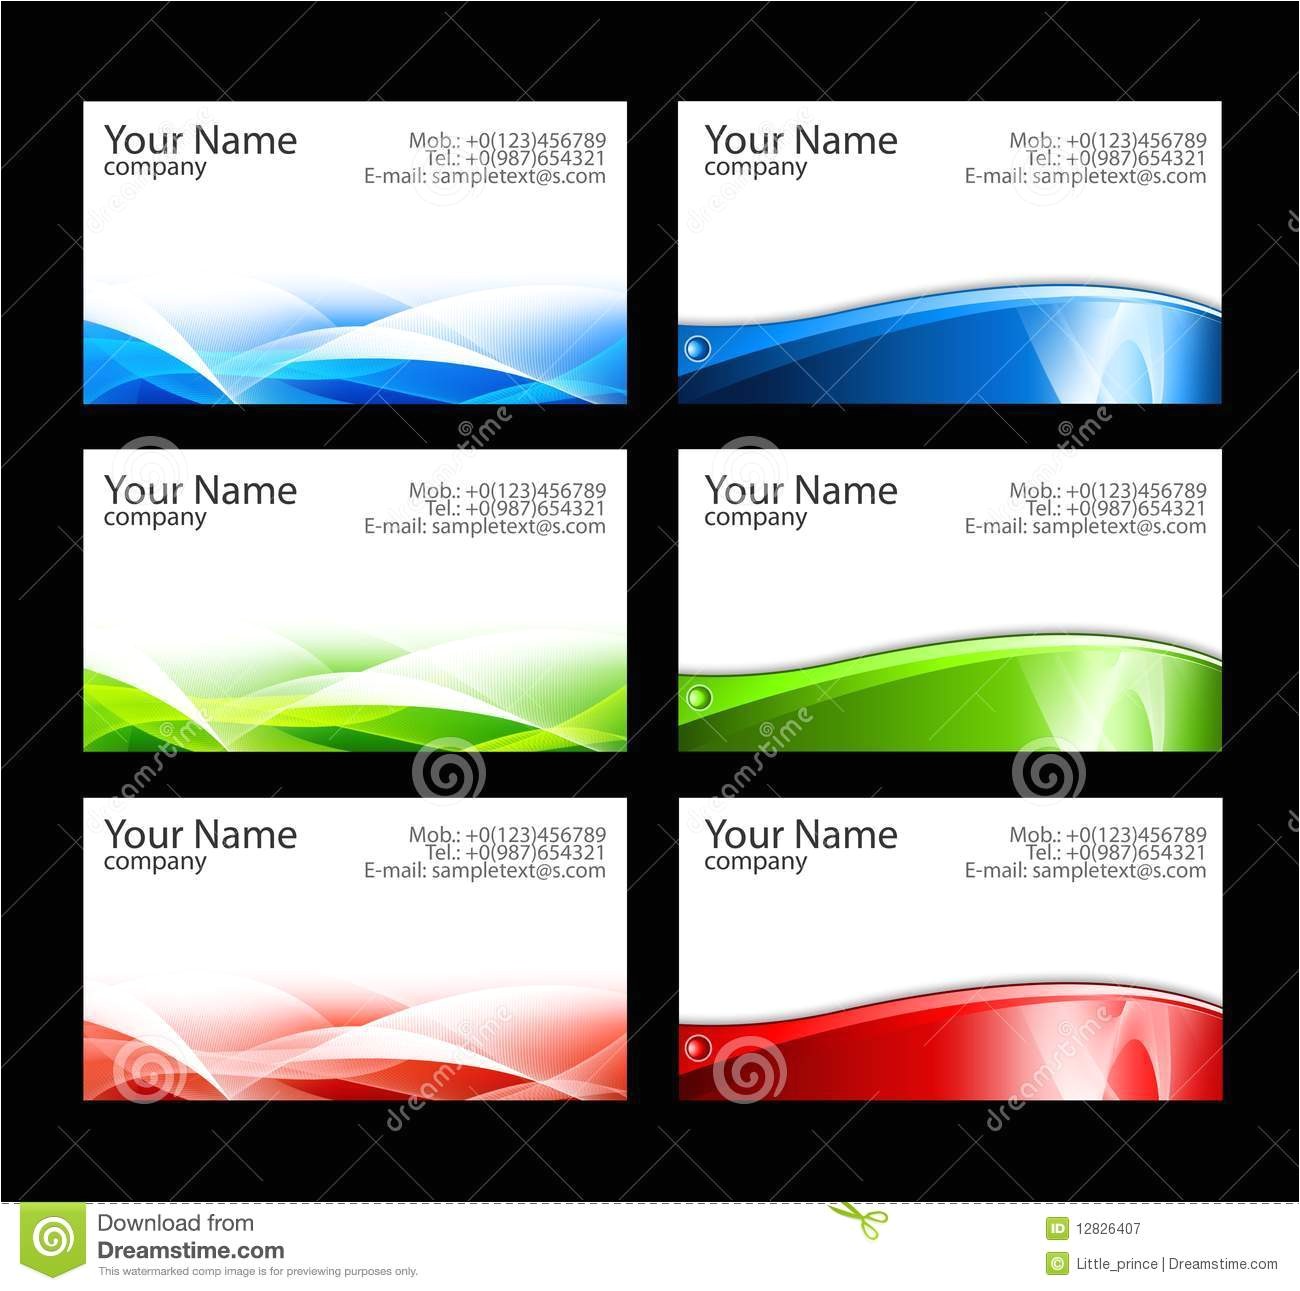 Microsoft Business Cards Templates Free Download Free Business Card Template Doliquid